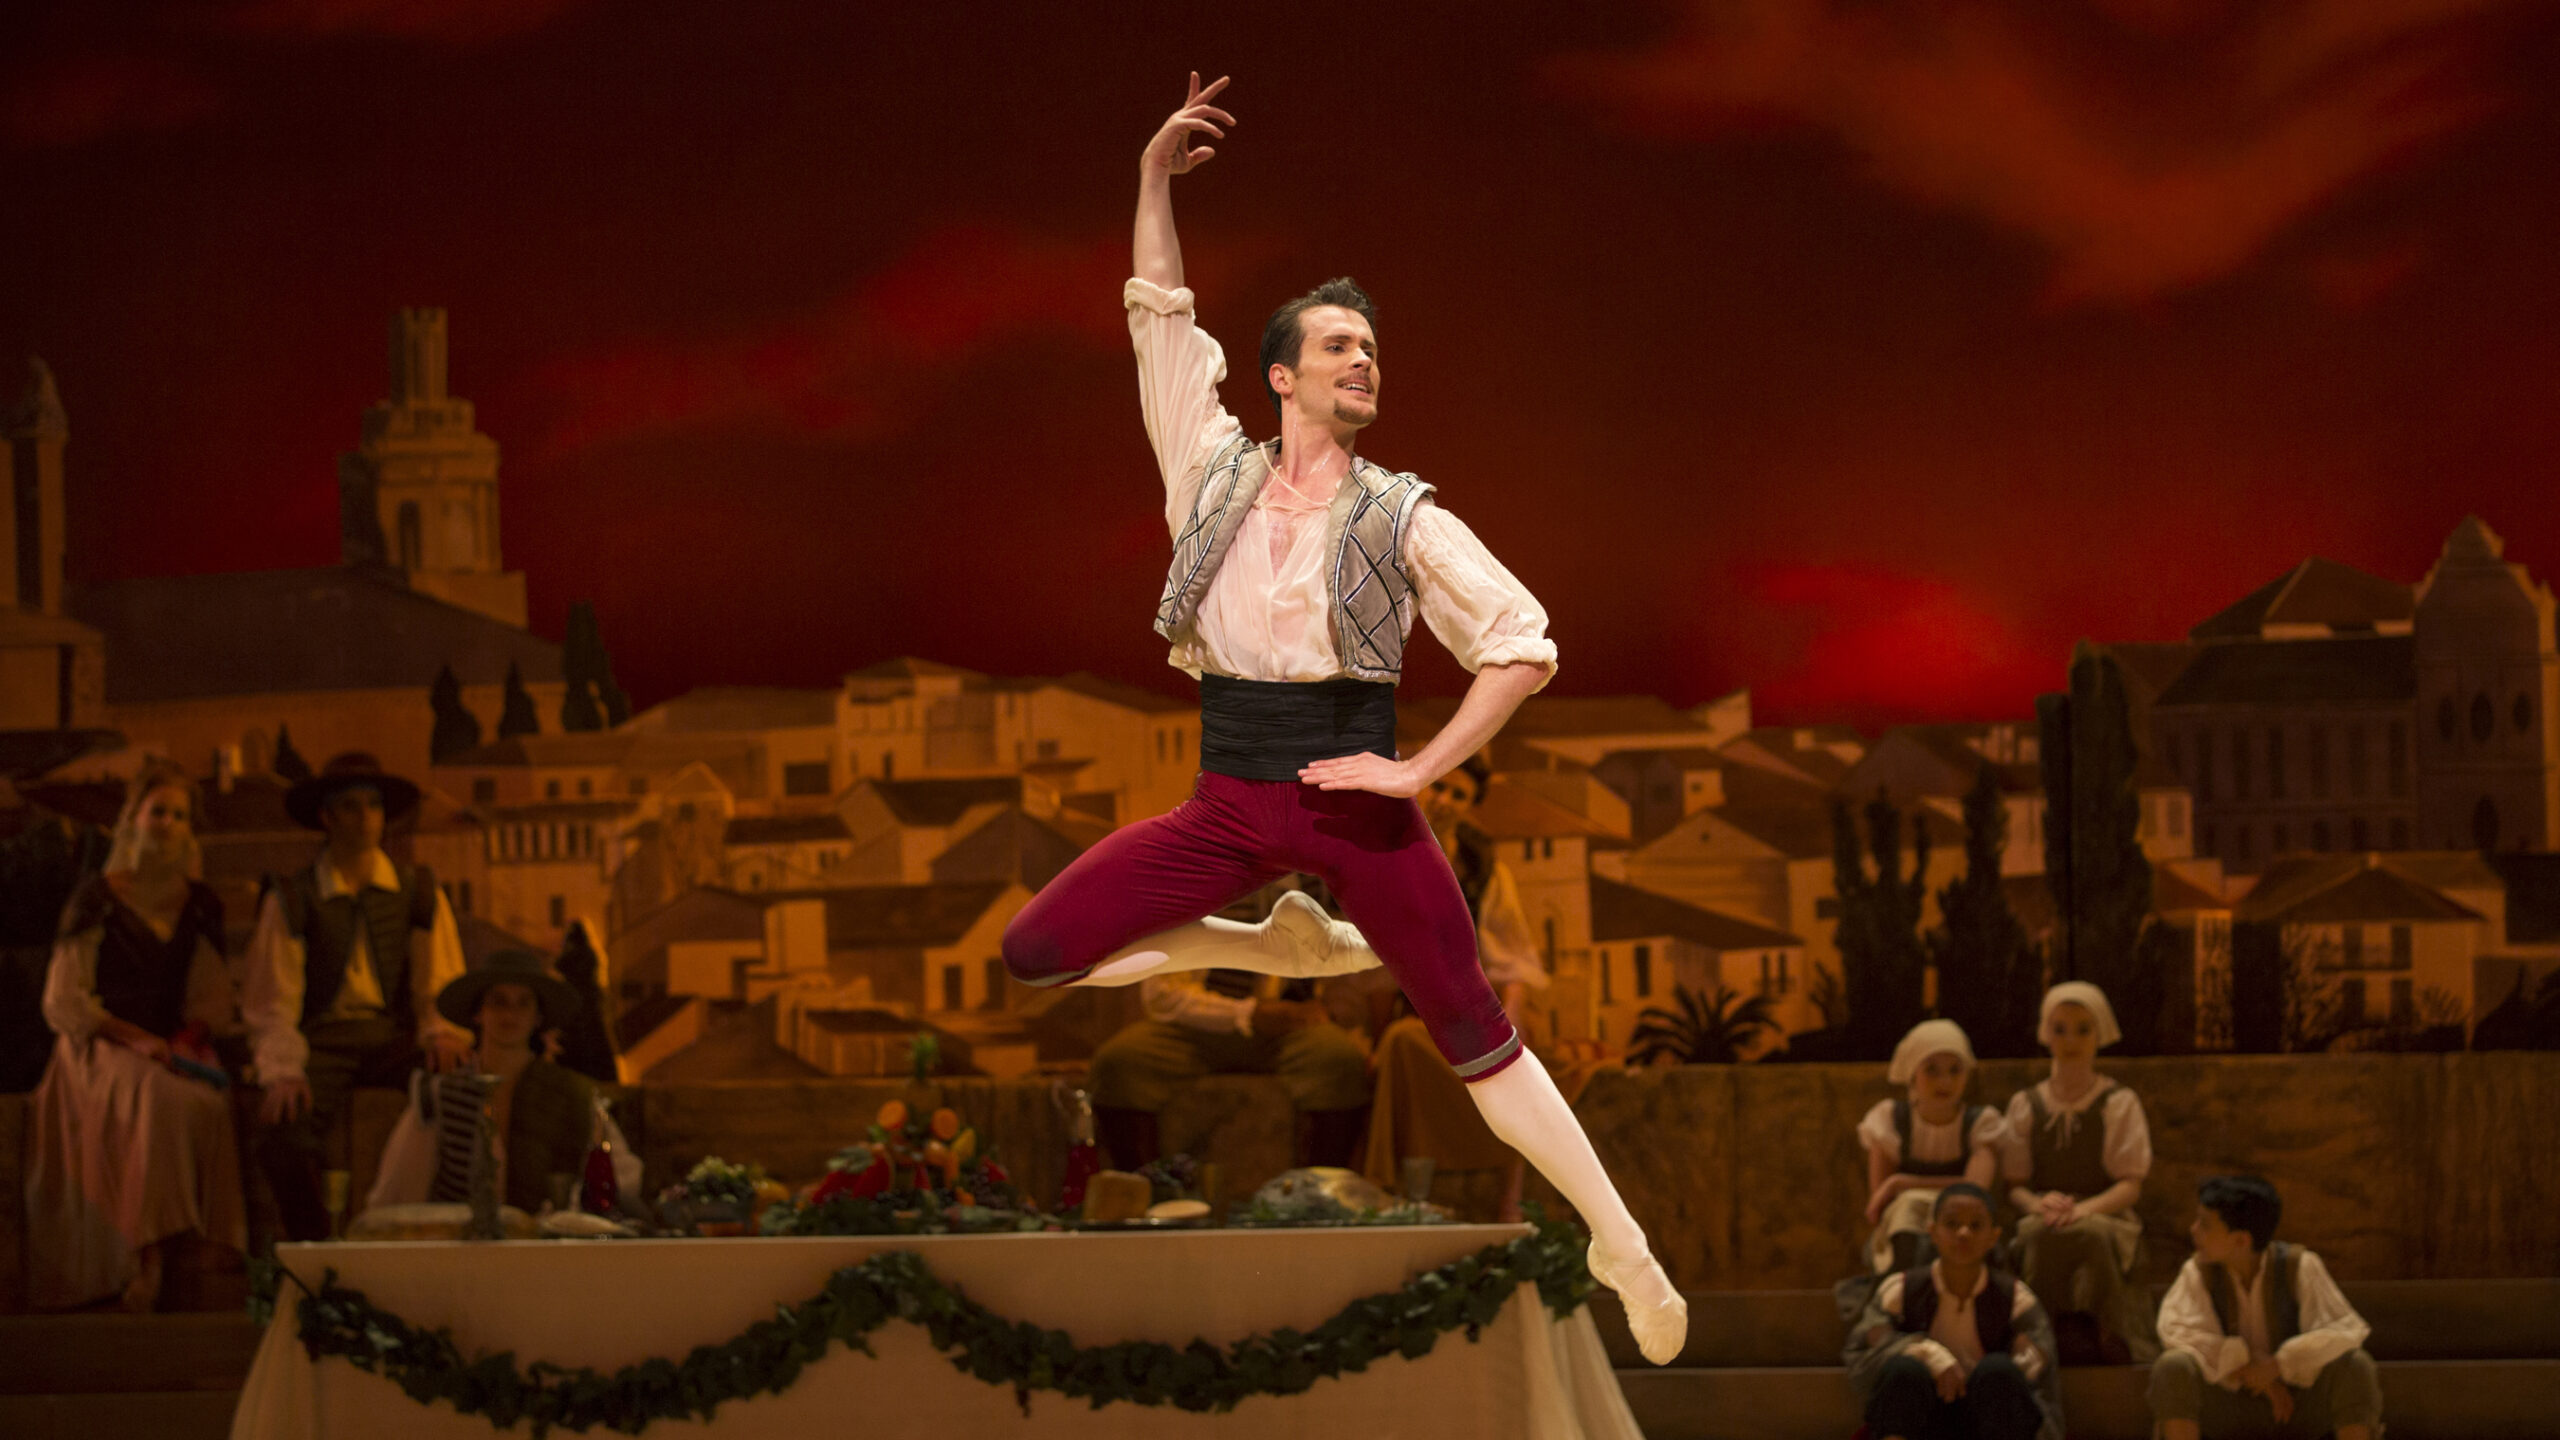 Seth Orza performs in a tavern scene from the ballet Don Quizote. He jumps straight up, his right leg in passé back, and holds his right arm up and places his left hand on his left hip. He looks out over his left shoulder and smiles. Orza wears a white peasant blouse, short gray sleeveless vest, black cumberbund, red knickers and white tights and ballet slippers. A long table full of food is in the background, and other dancers sit and mill about. The set backdrop shows a Spanish city.